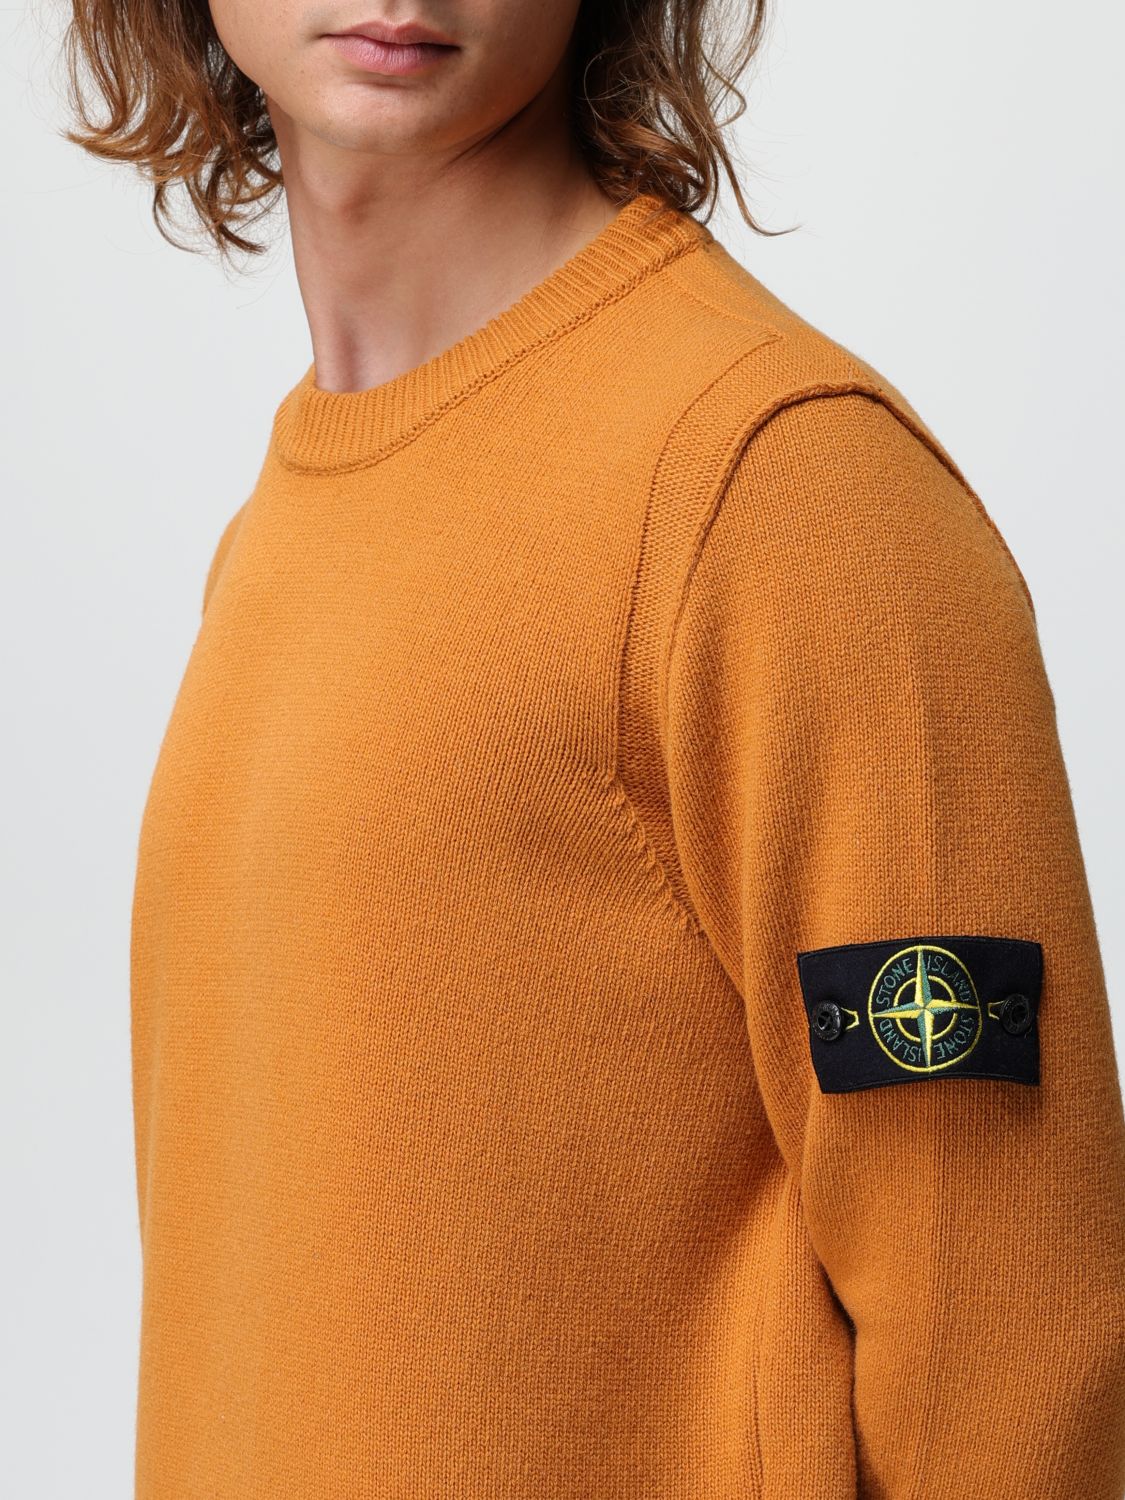 STONE ISLAND: sweater for man - Rust  Stone Island sweater 508A3 online at